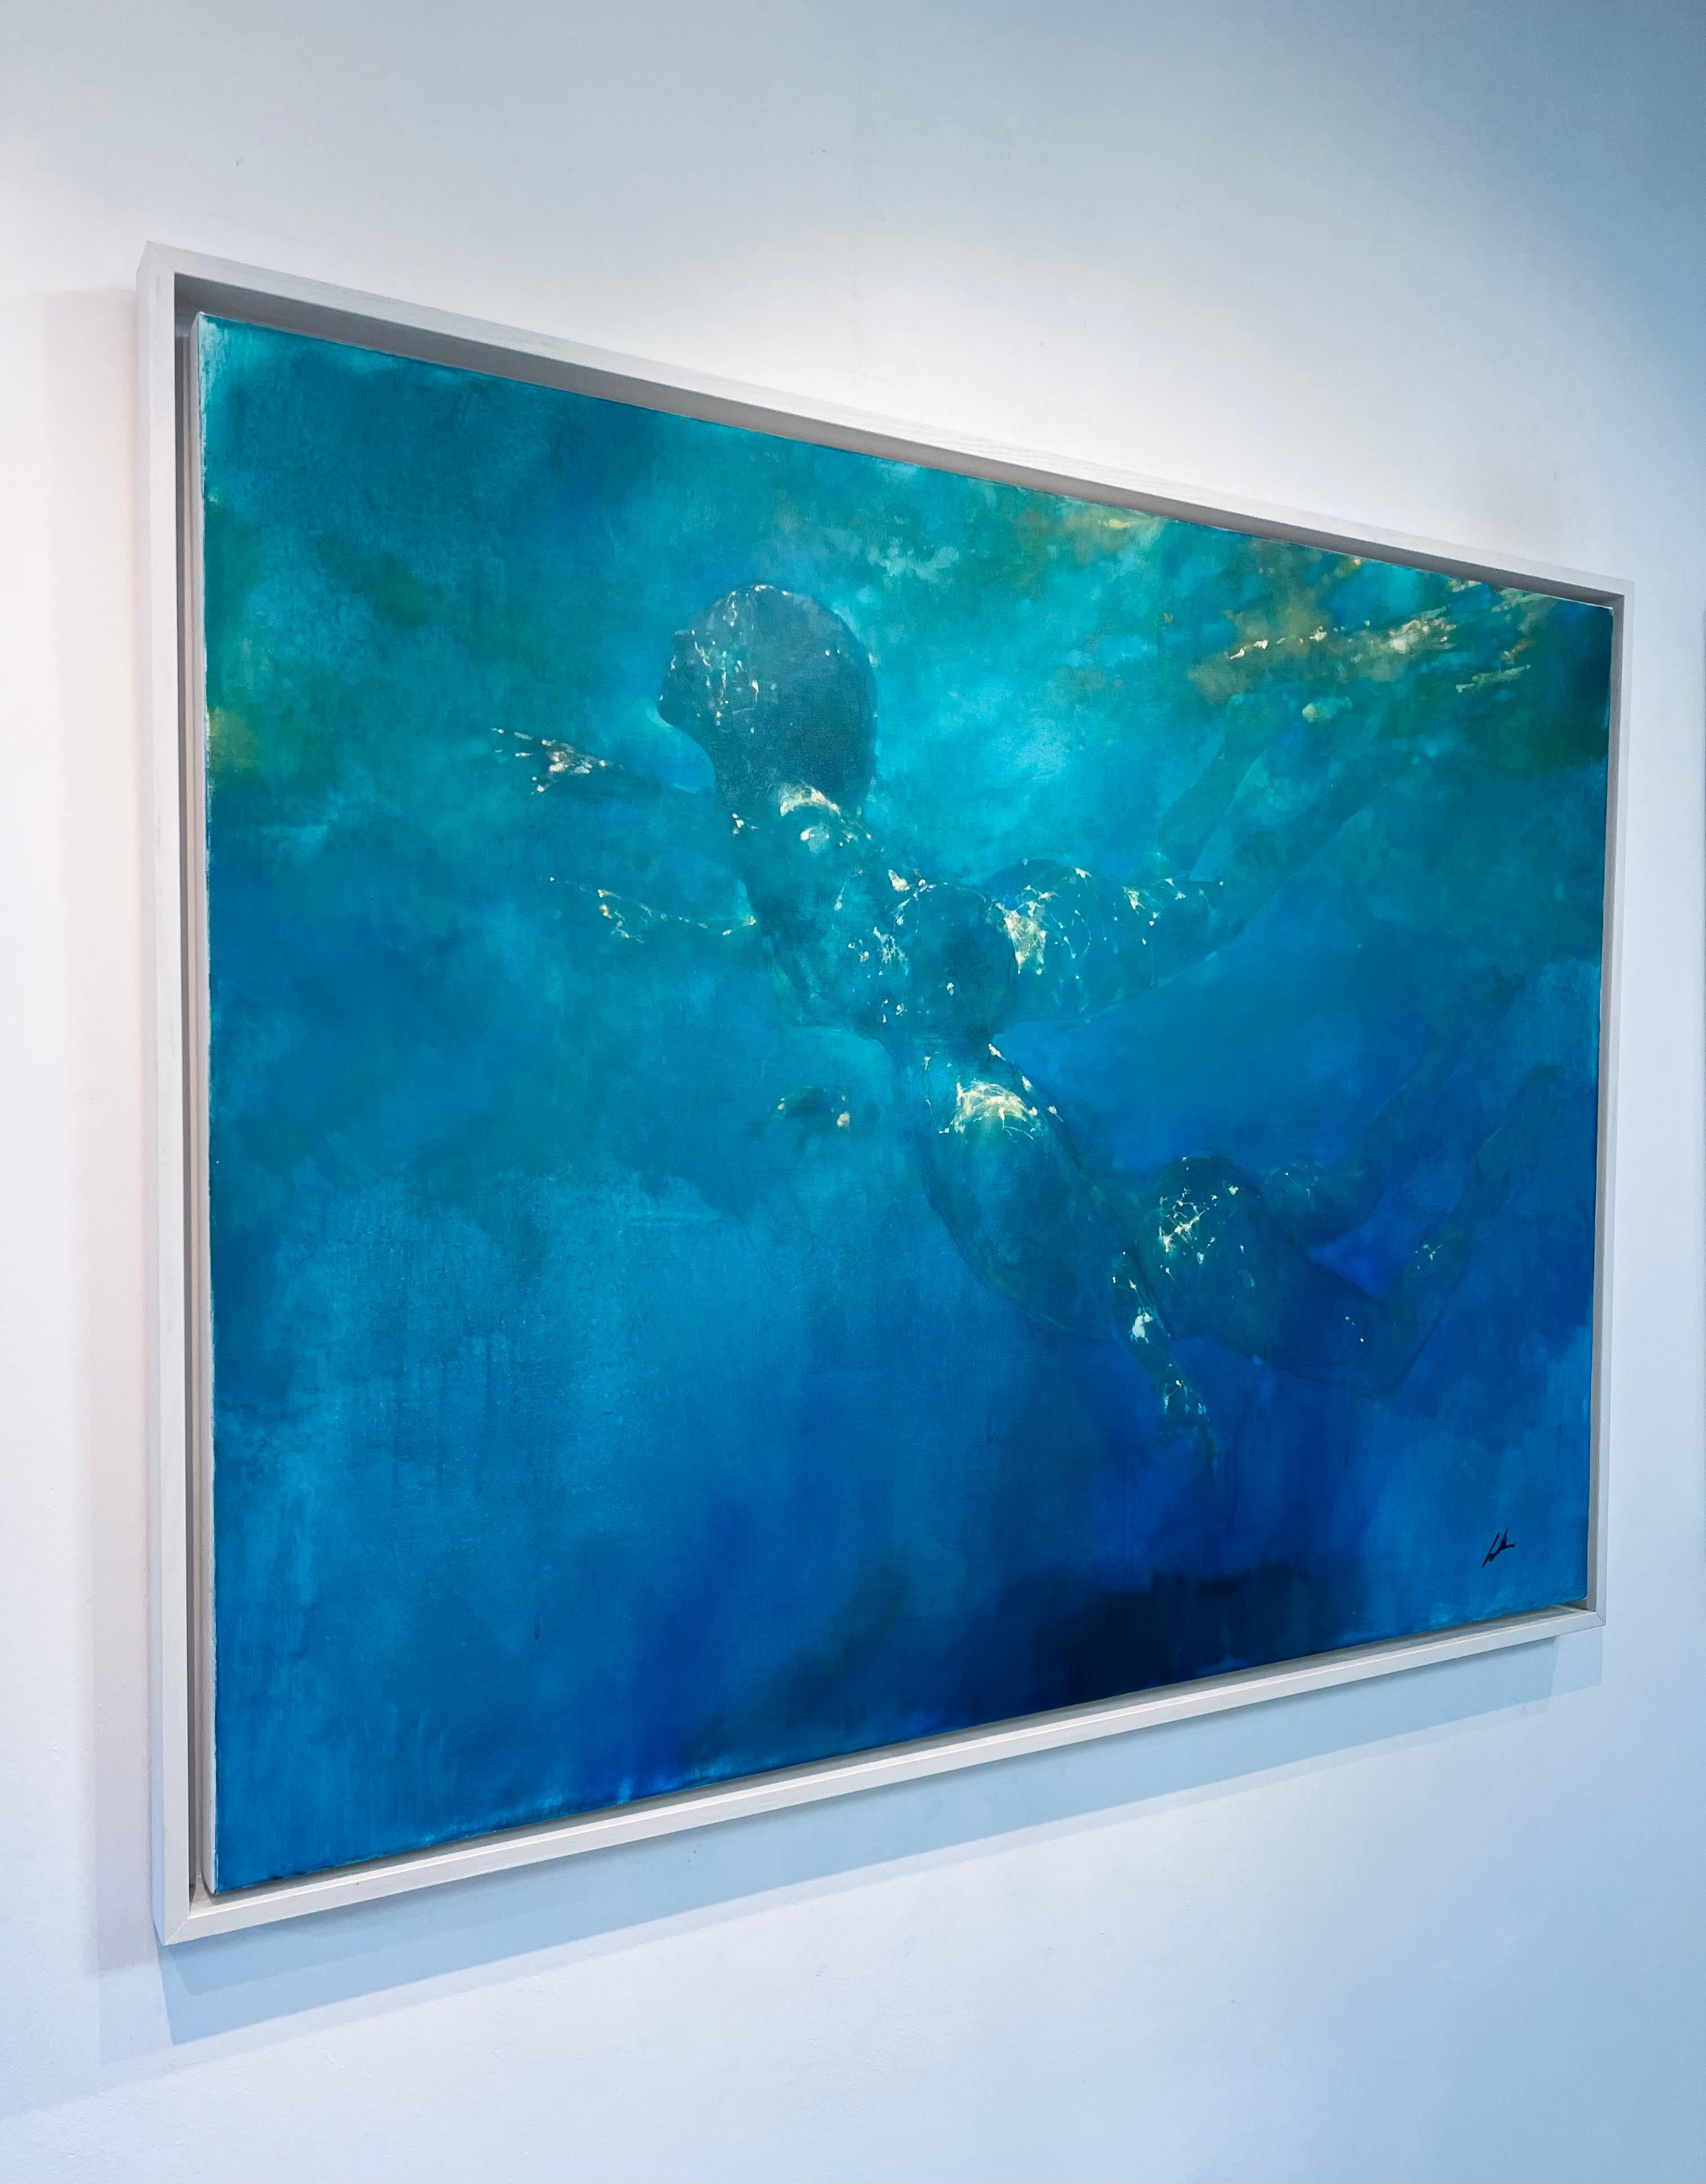 Emerald World - modern art, abstract human figurative expression painting - Abstract Expressionist Painting by Bill Bate